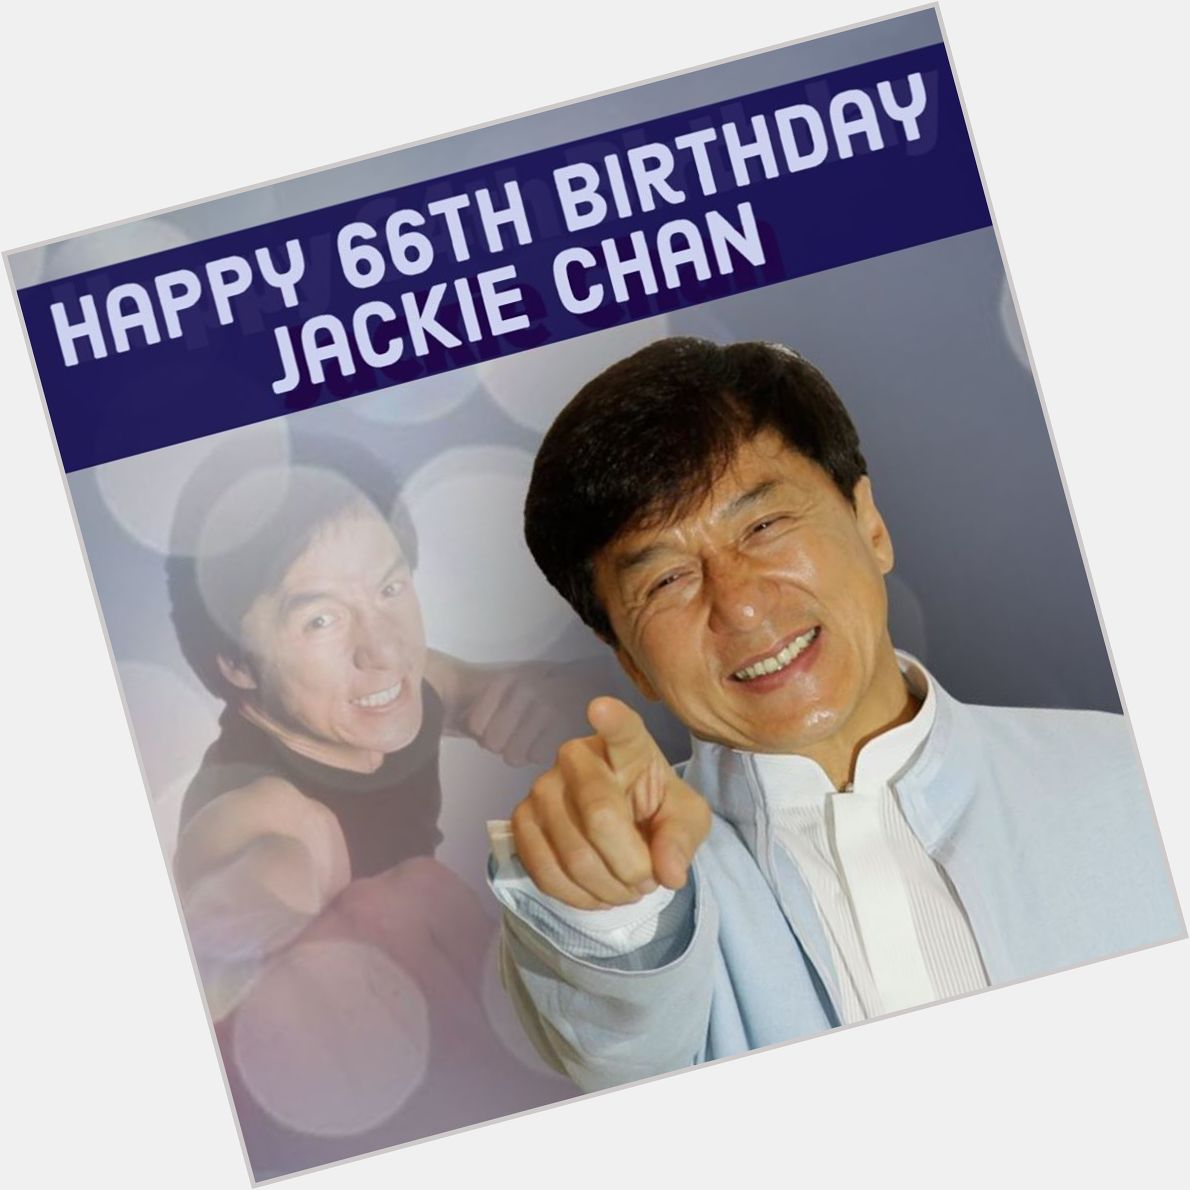 Happy 66th birthday to Jackie Chan! 